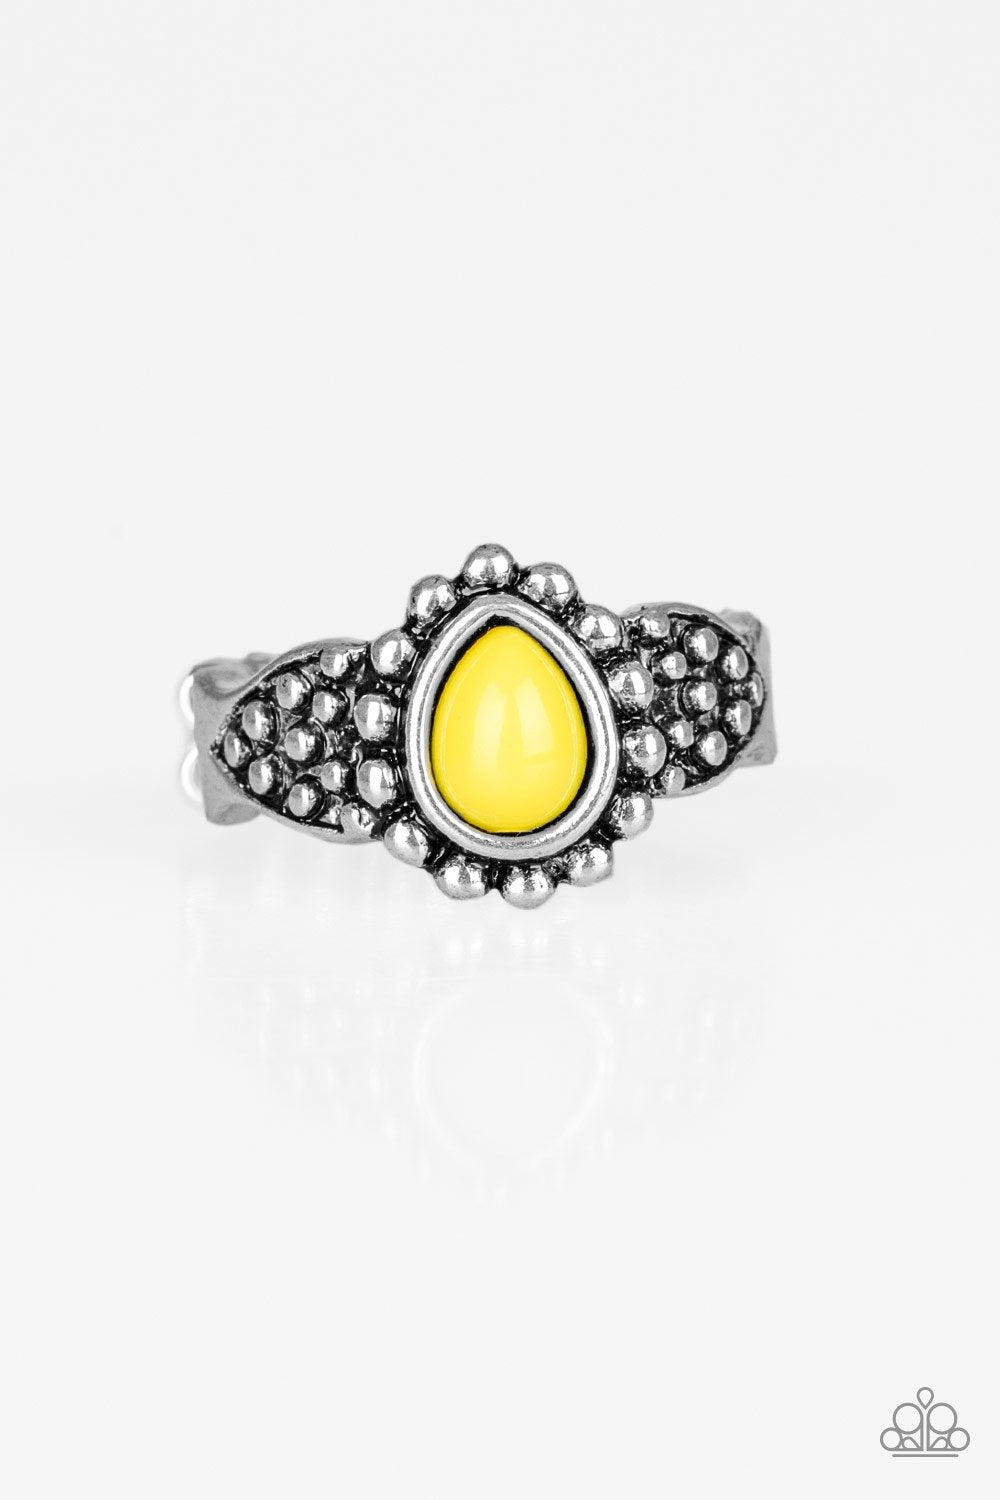 Pep Talk Yellow and Silver Ring - Paparazzi Accessories-CarasShop.com - $5 Jewelry by Cara Jewels